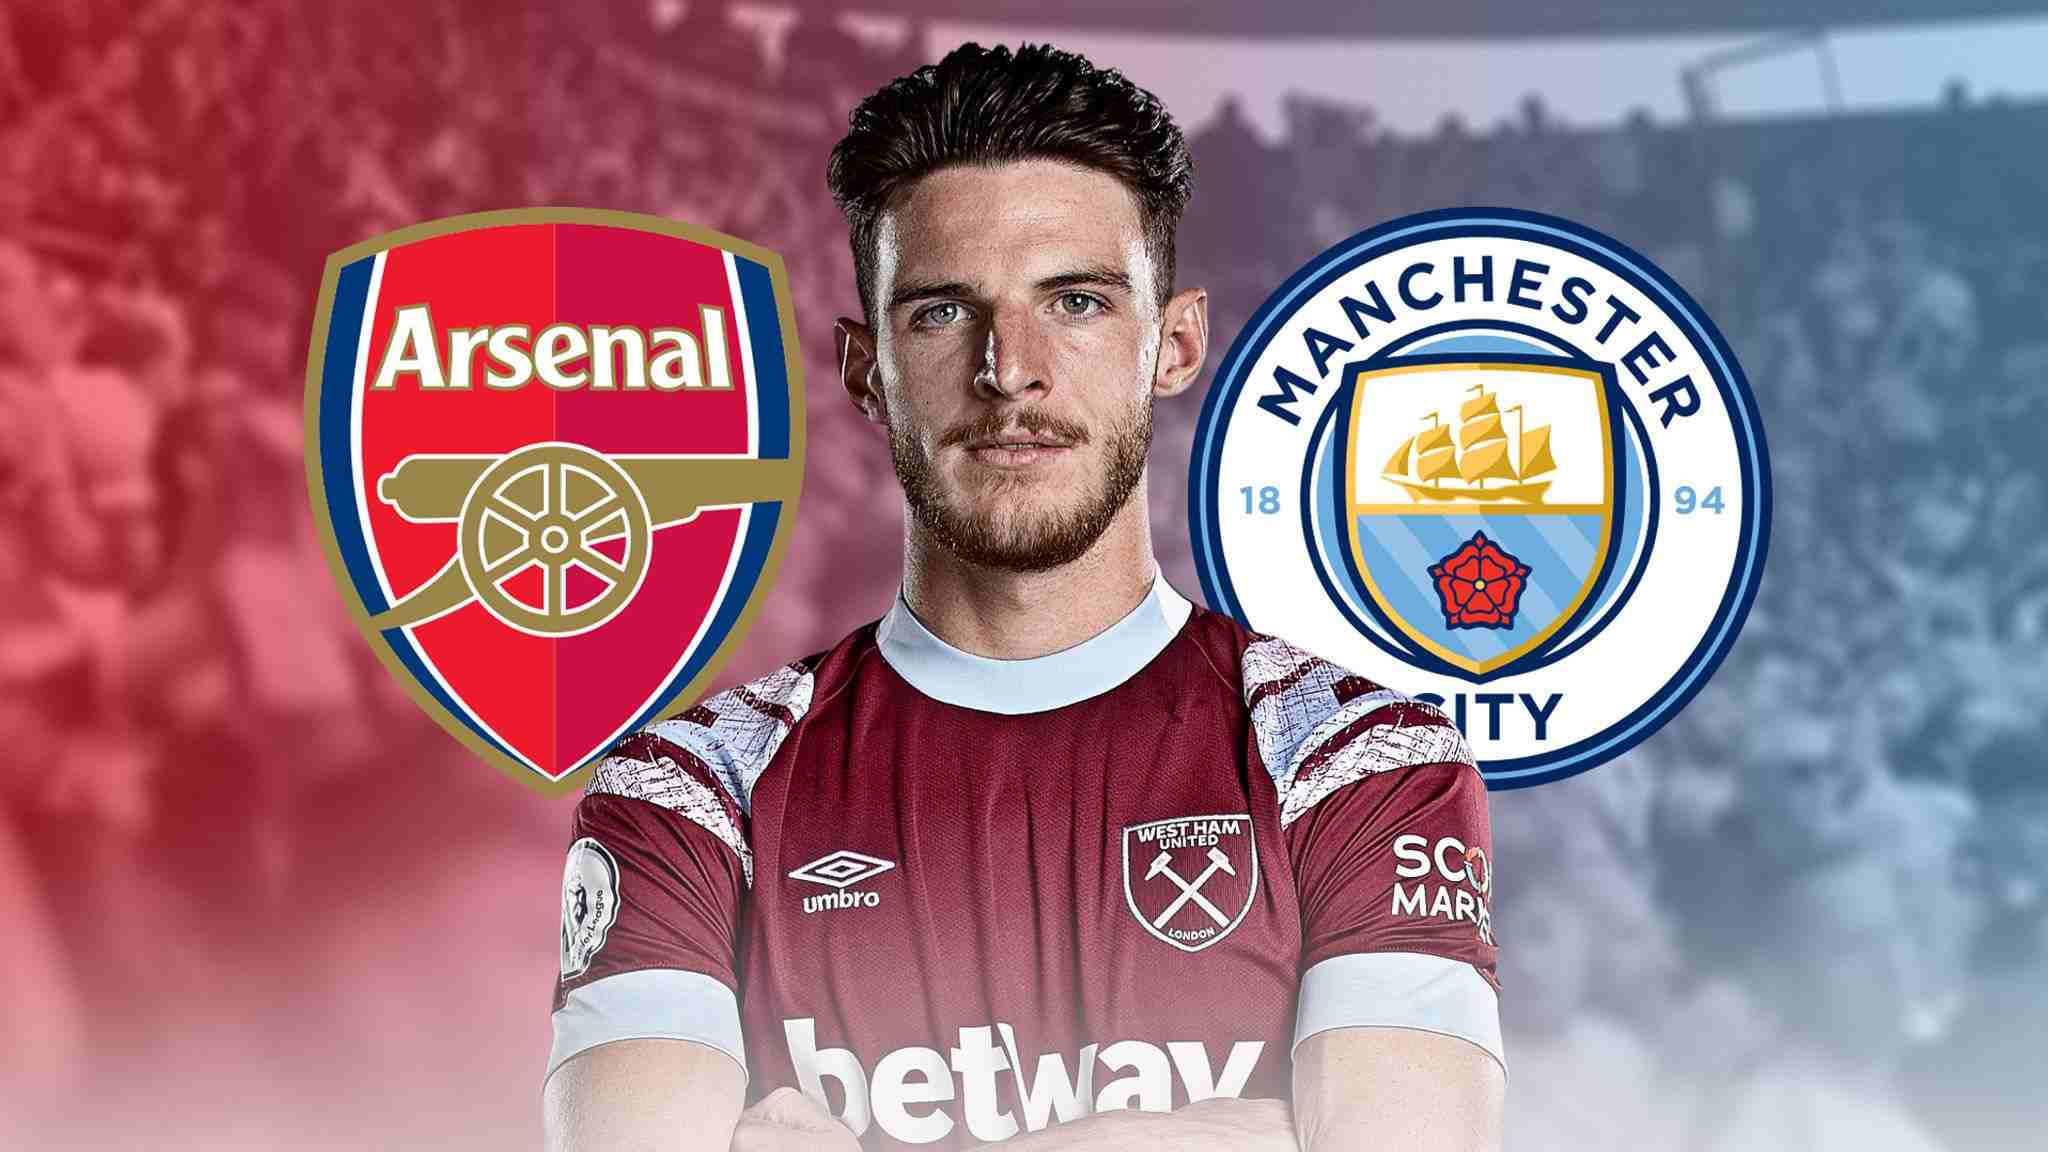 Arsenal News: Declan Rice Deal Still Not Completed Despite Manchester City Exit; Fabrizio Romano Confirms Talks Going On To Resolve One Major Problem